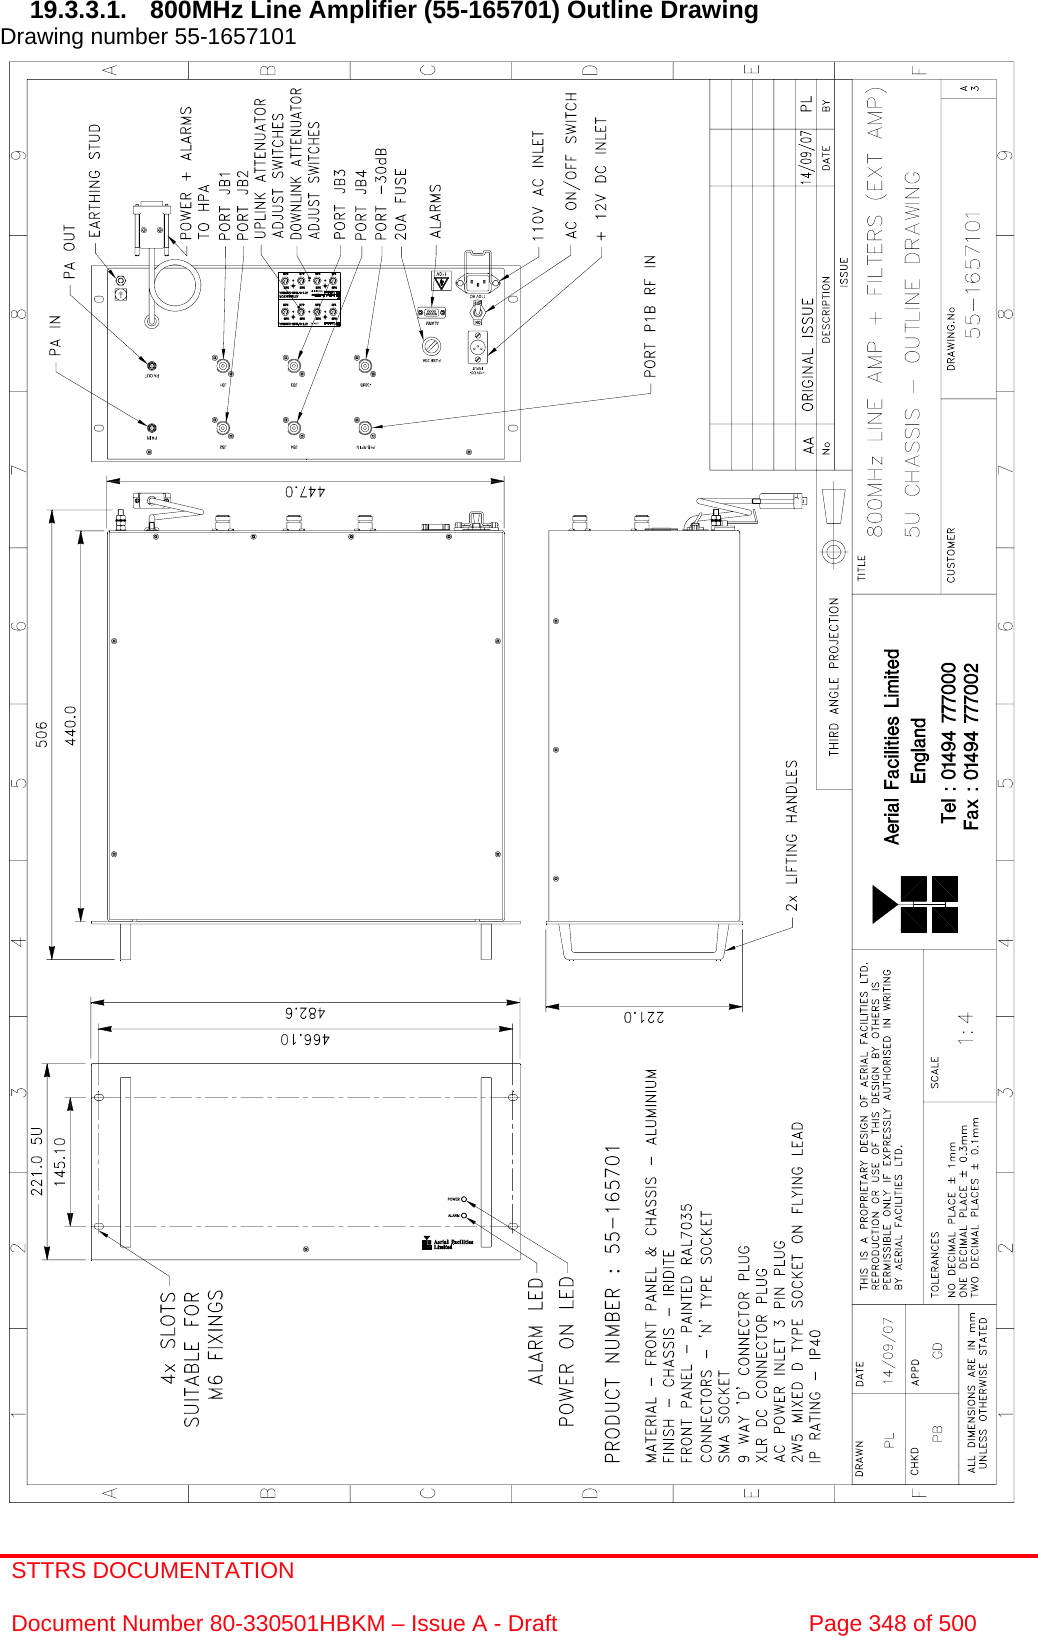 STTRS DOCUMENTATION  Document Number 80-330501HBKM – Issue A - Draft  Page 348 of 500   19.3.3.1.  800MHz Line Amplifier (55-165701) Outline Drawing  Drawing number 55-1657101                                            